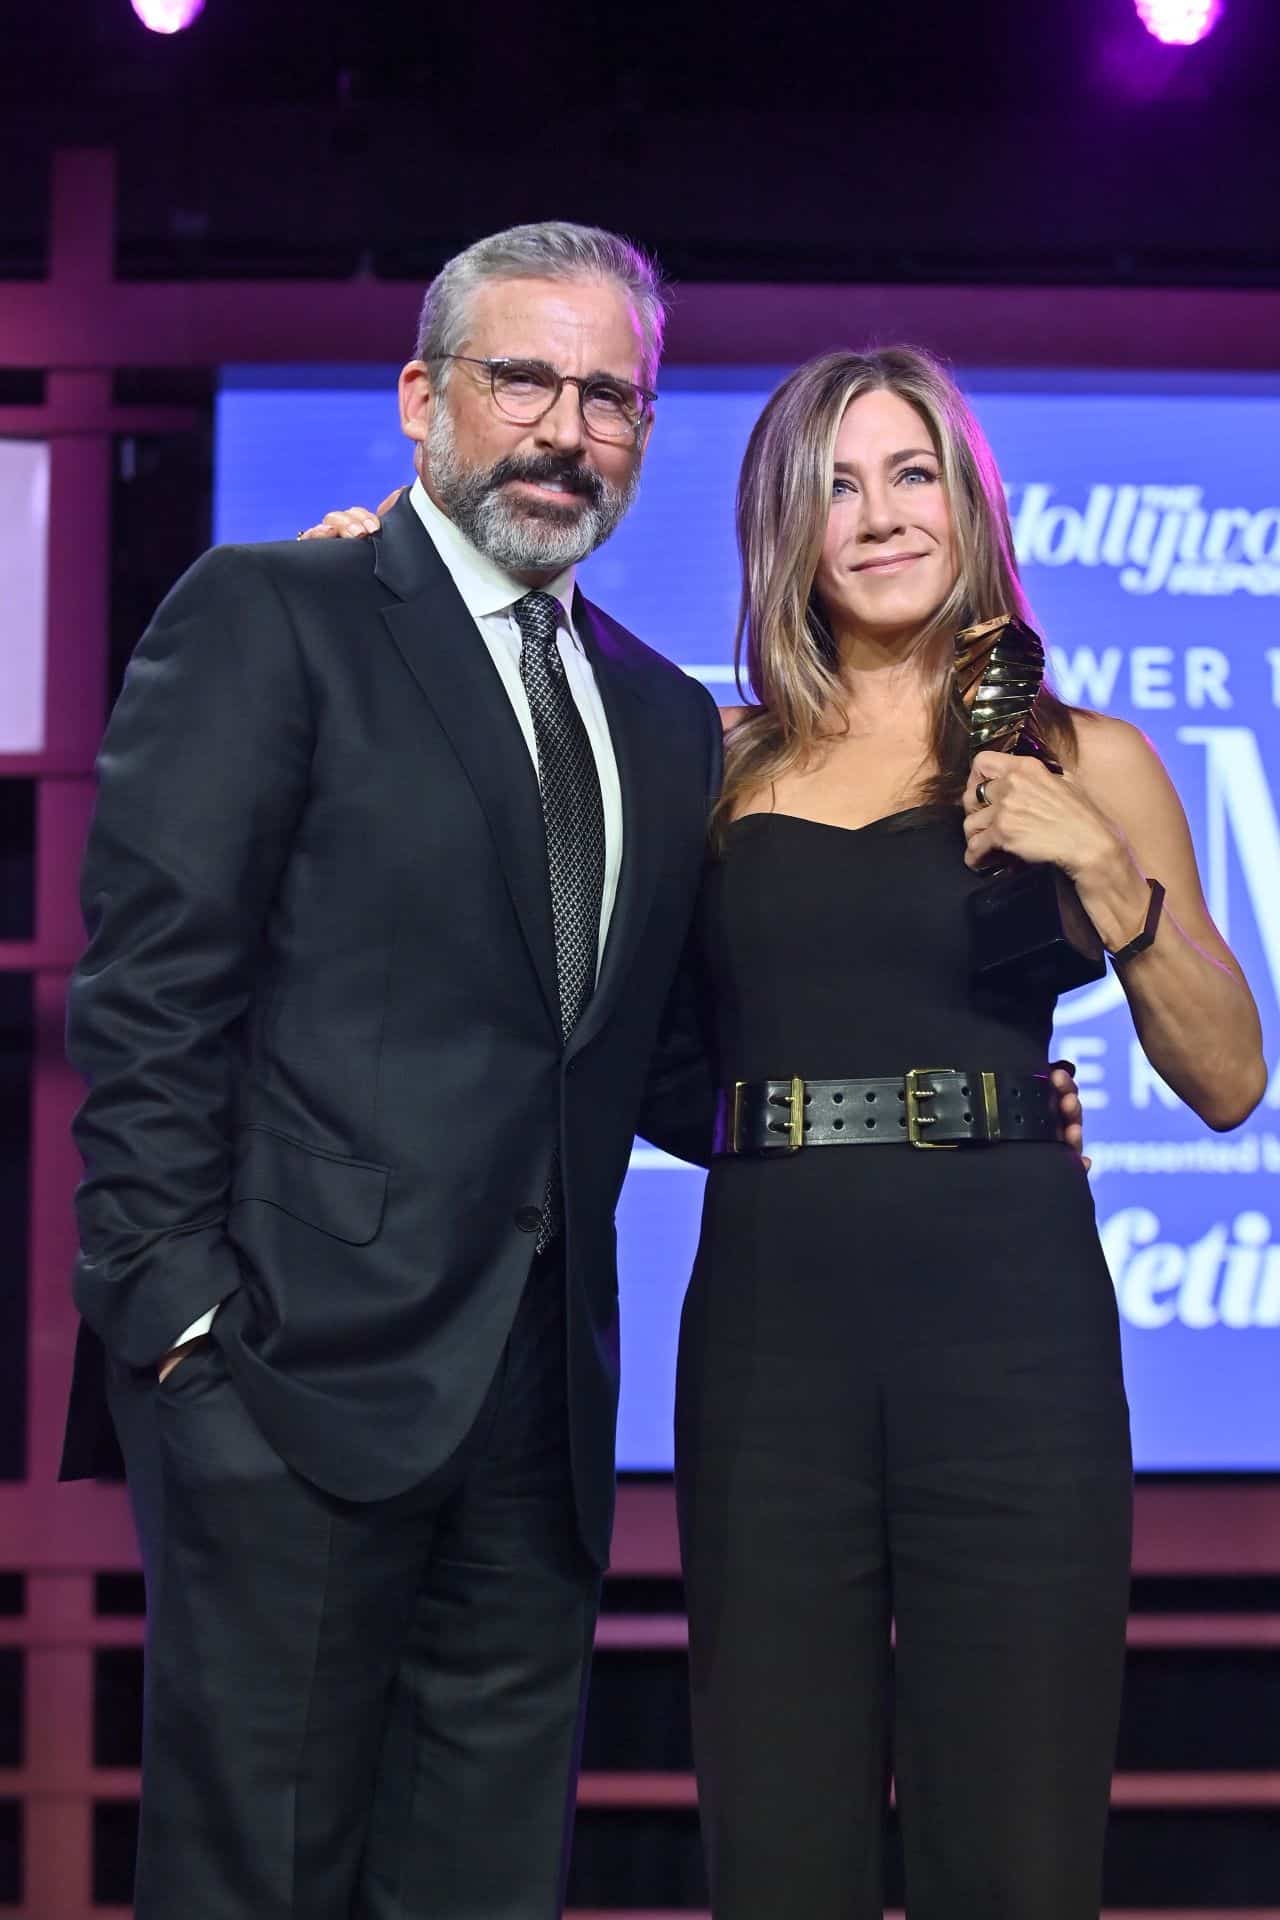 Jennifer Aniston Wowed All at THR’s 2021 Women in Entertainment Event